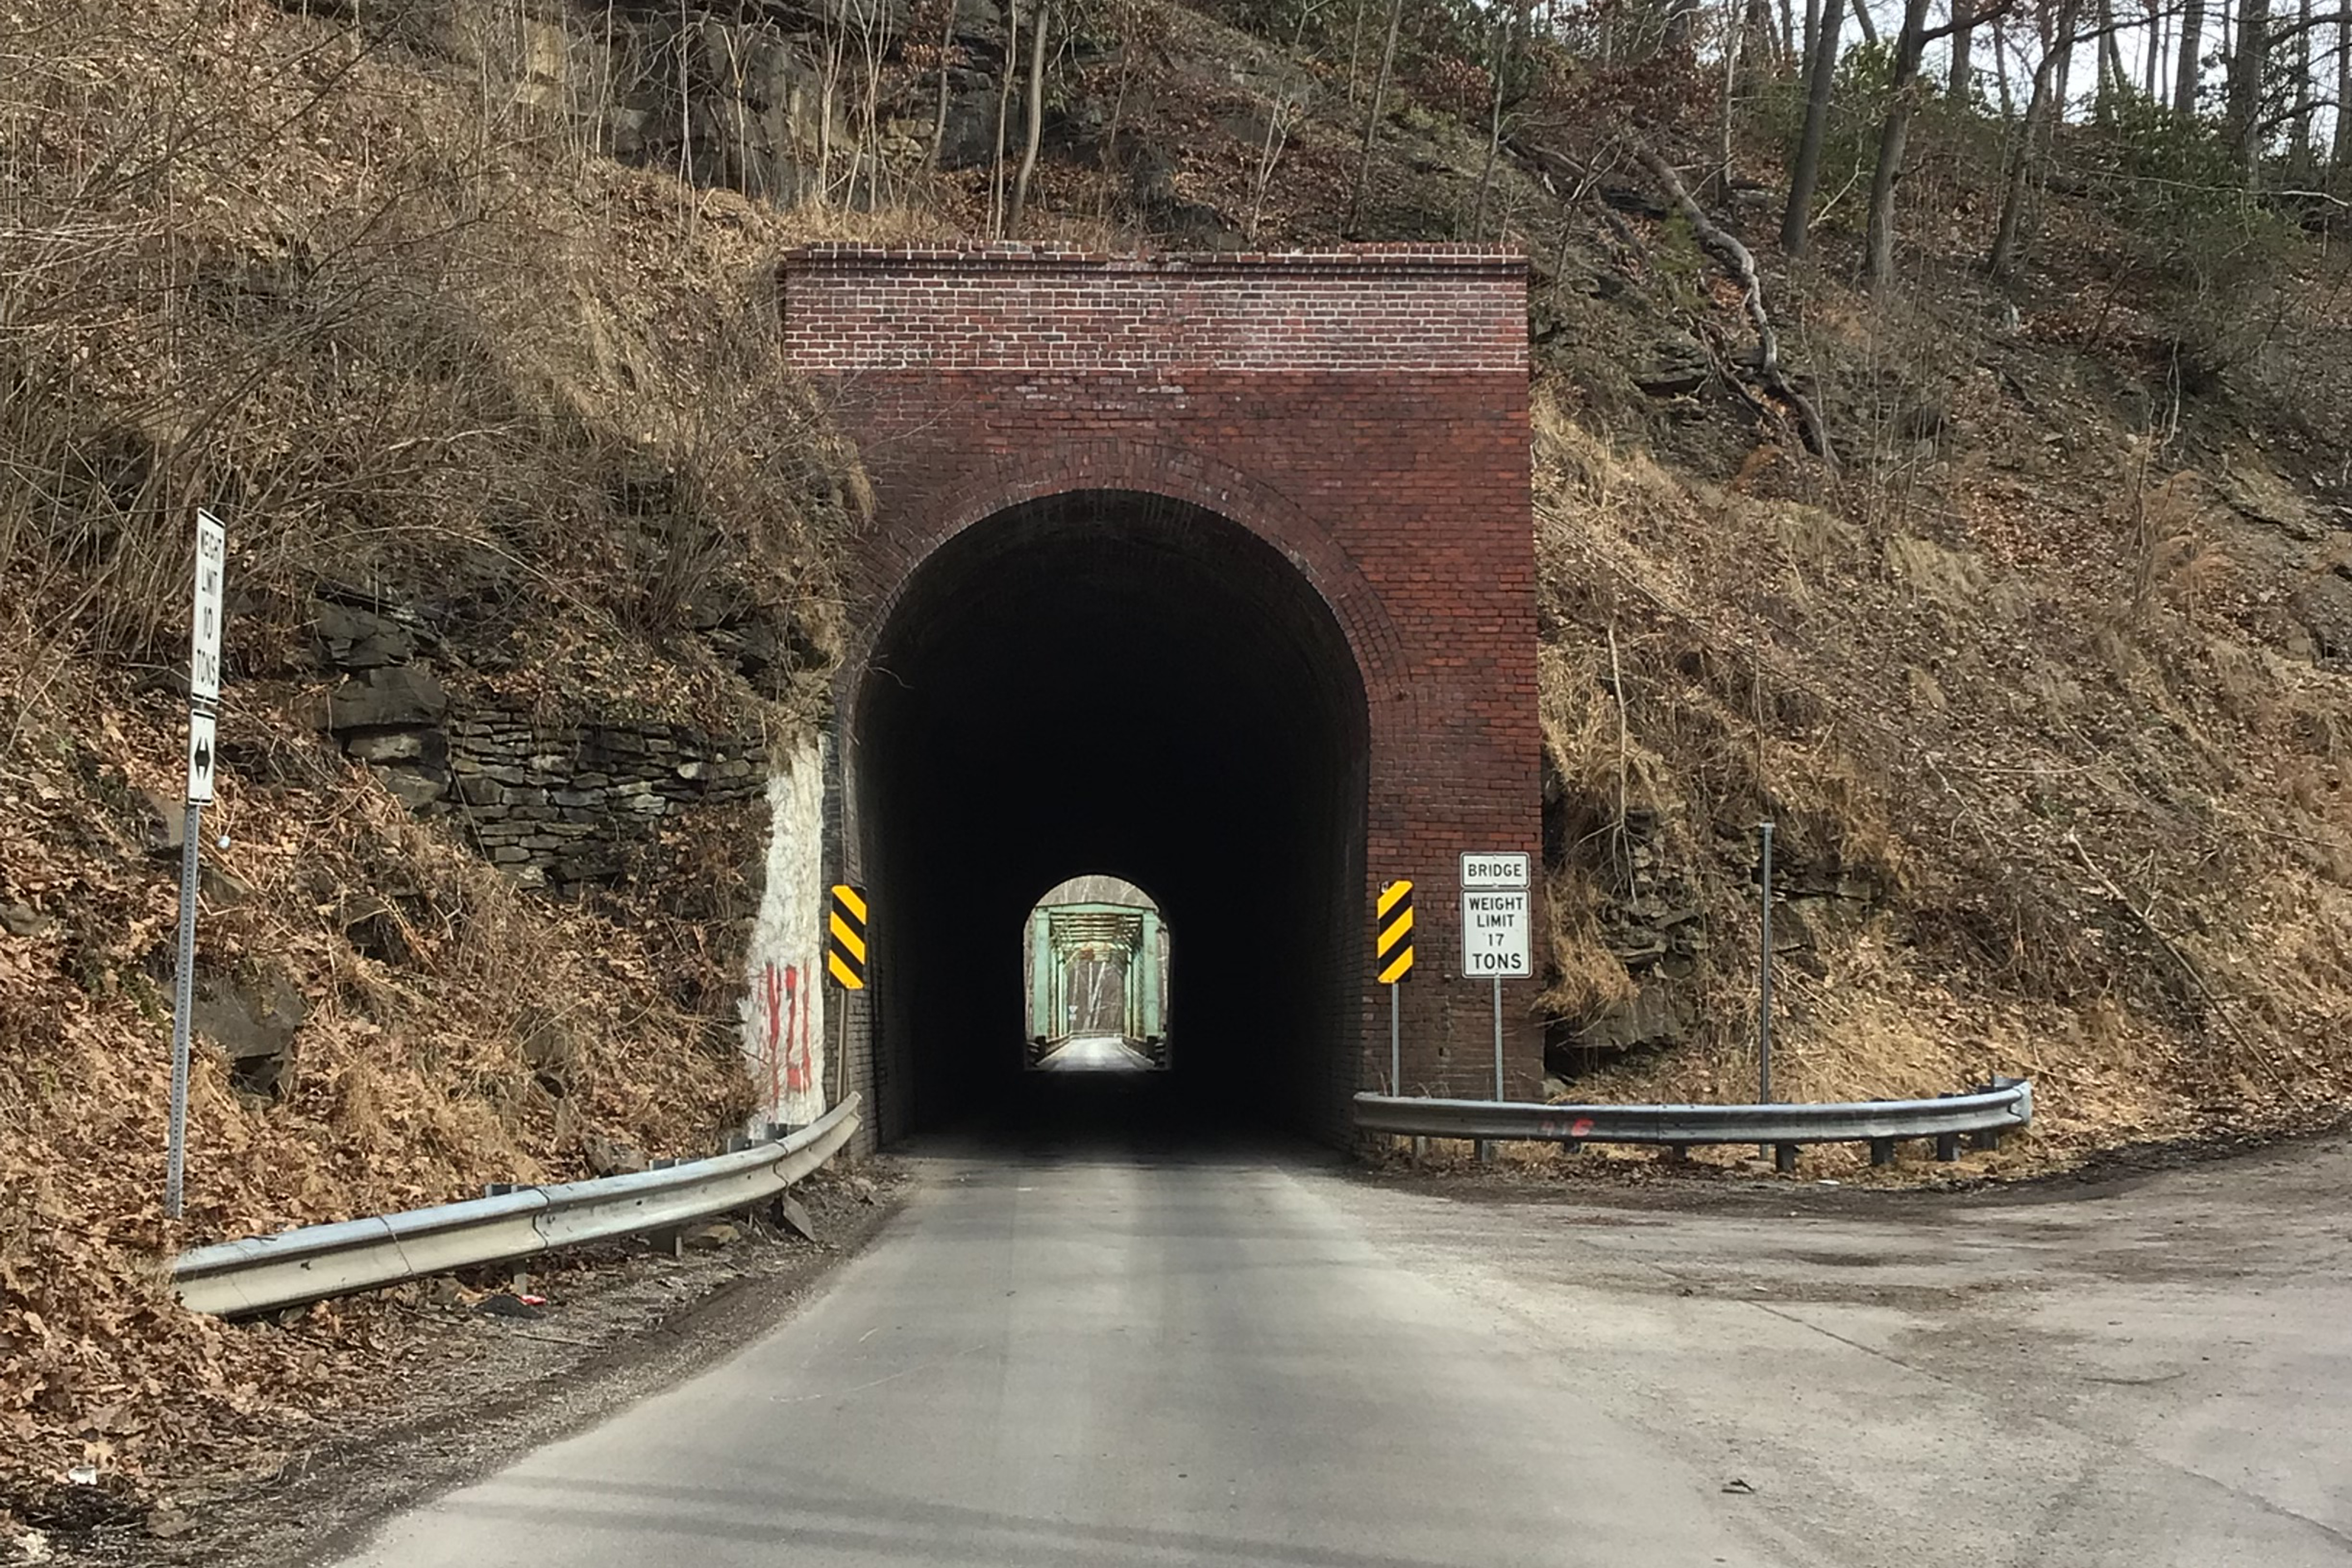 View of approaching Layton tunnel